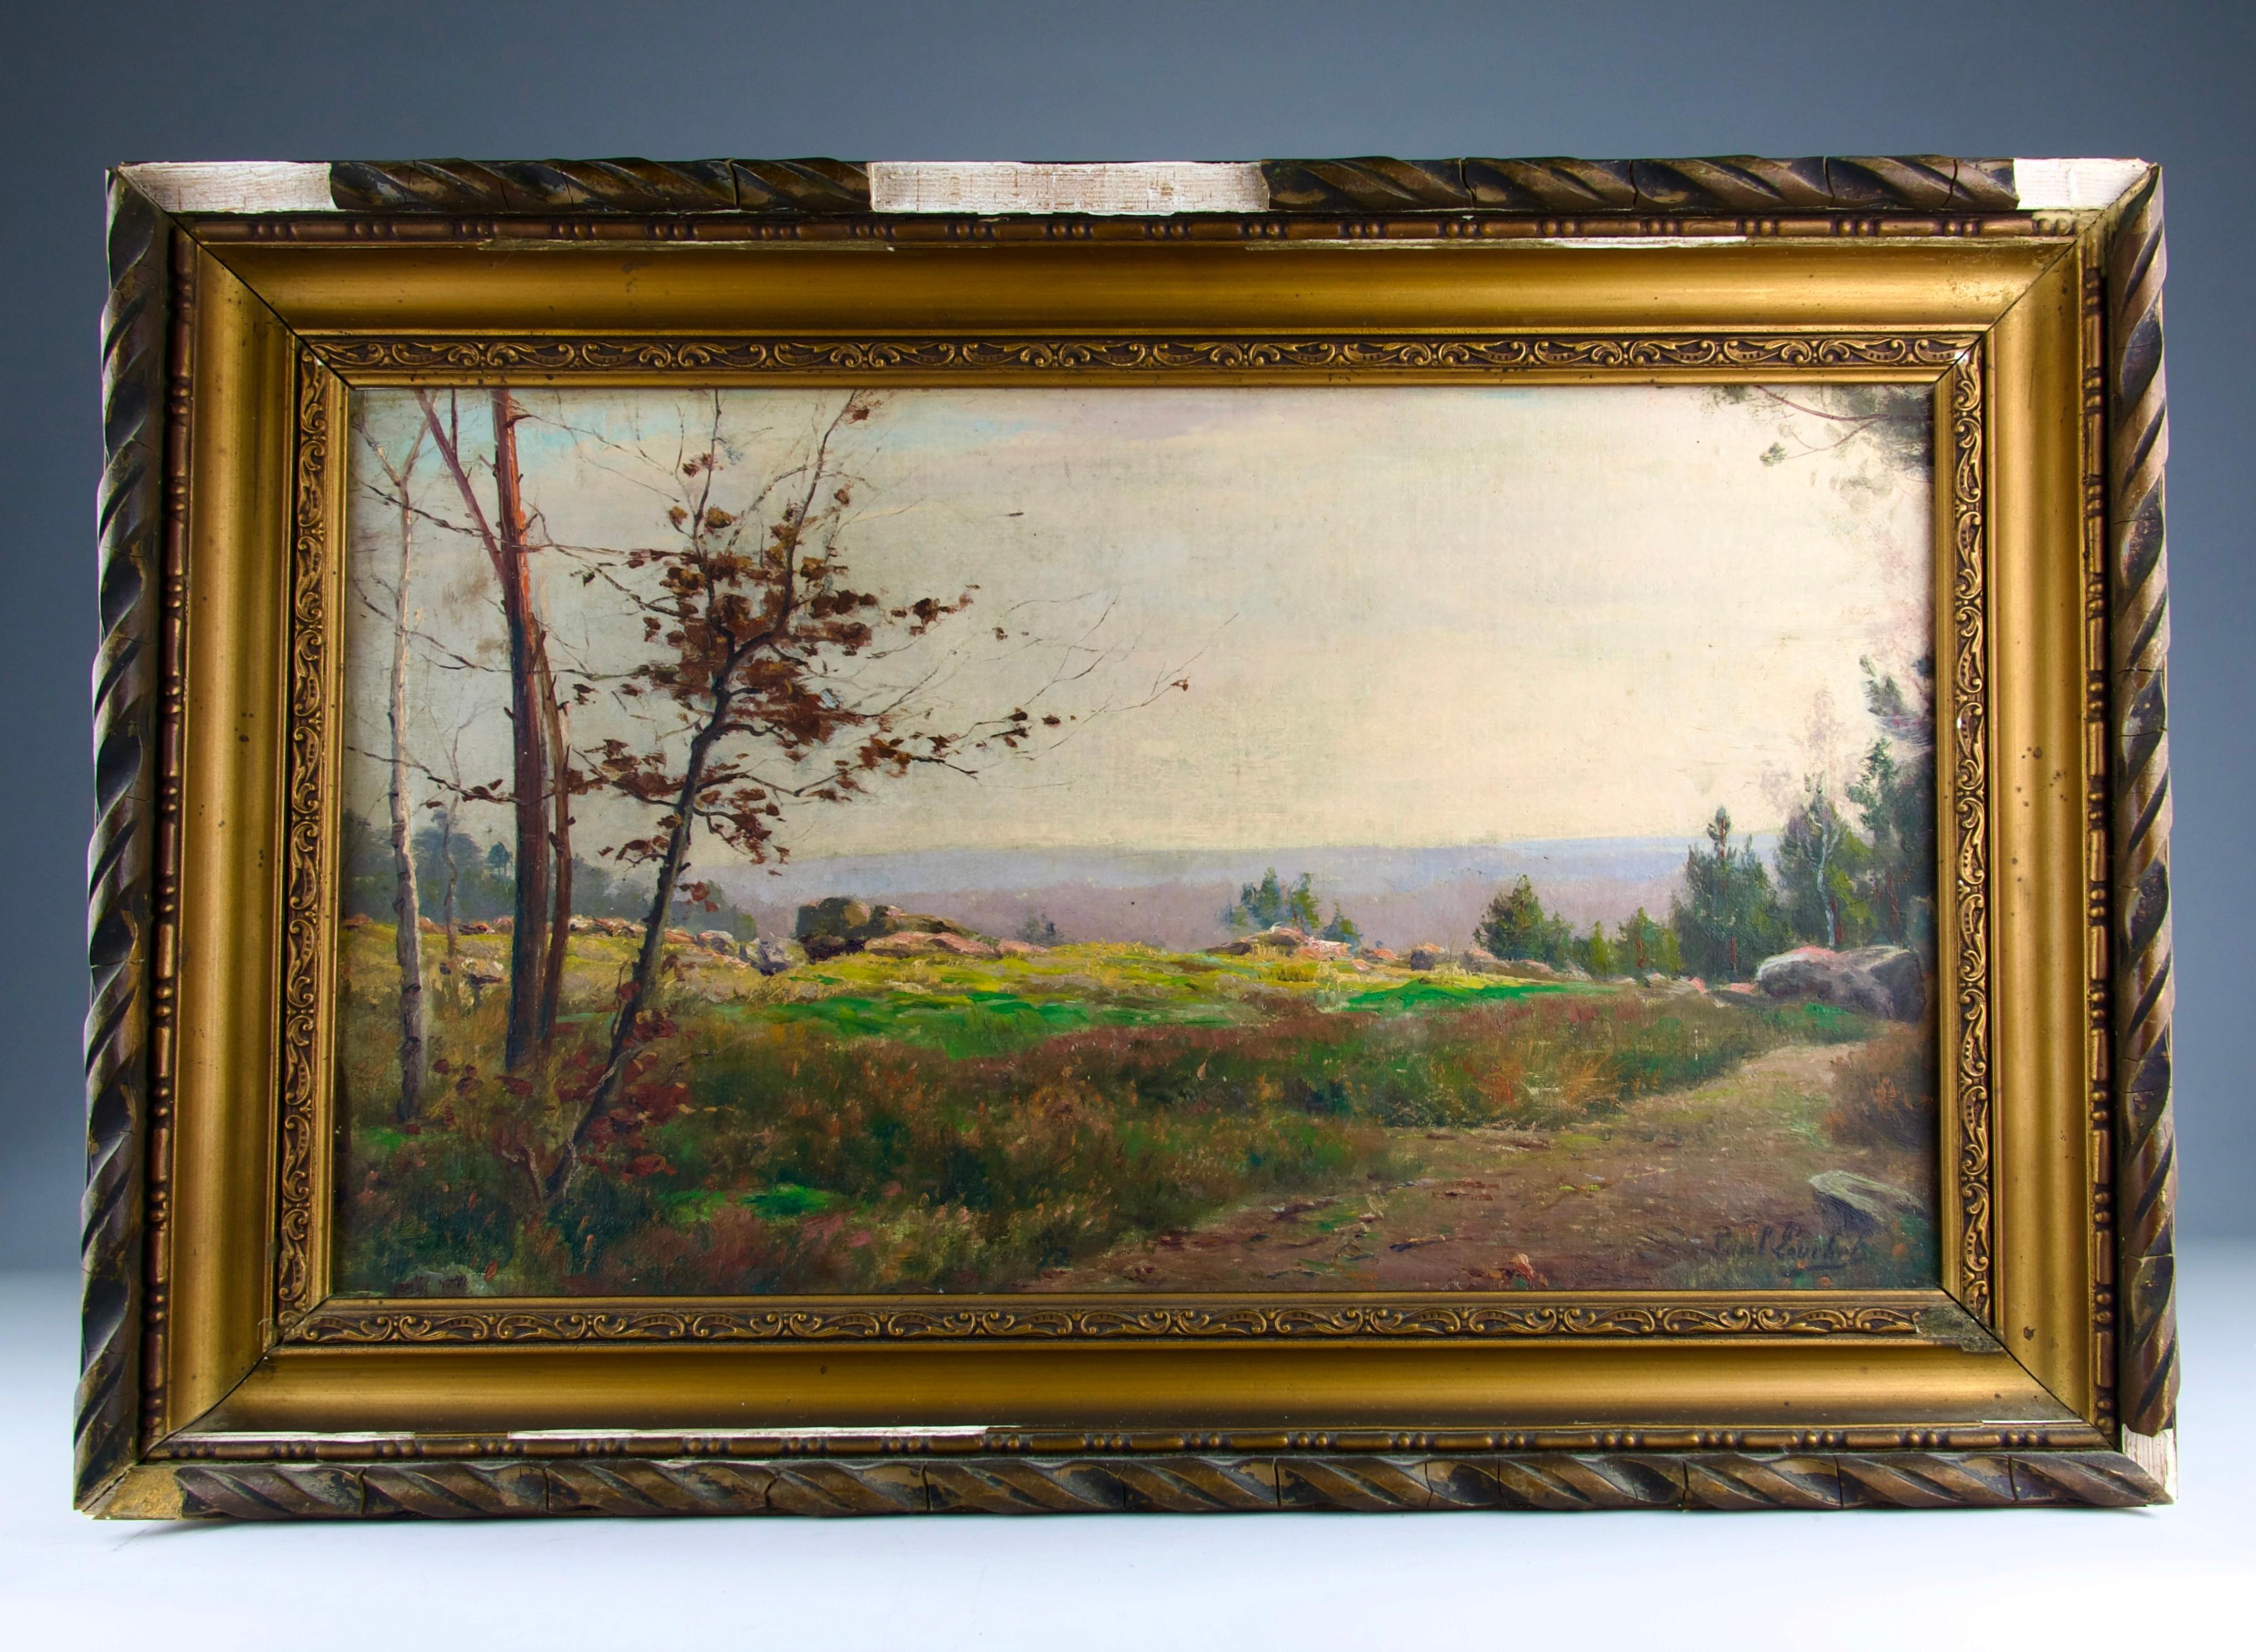 Superb painting on cardboard of a forest landscape of Fontainebleau at dawn by the multidisciplinary artist Paul Louchet (1854-1936). Signed at the bottom right and titled at the back.

The painting is in excellent condition. The frame has some